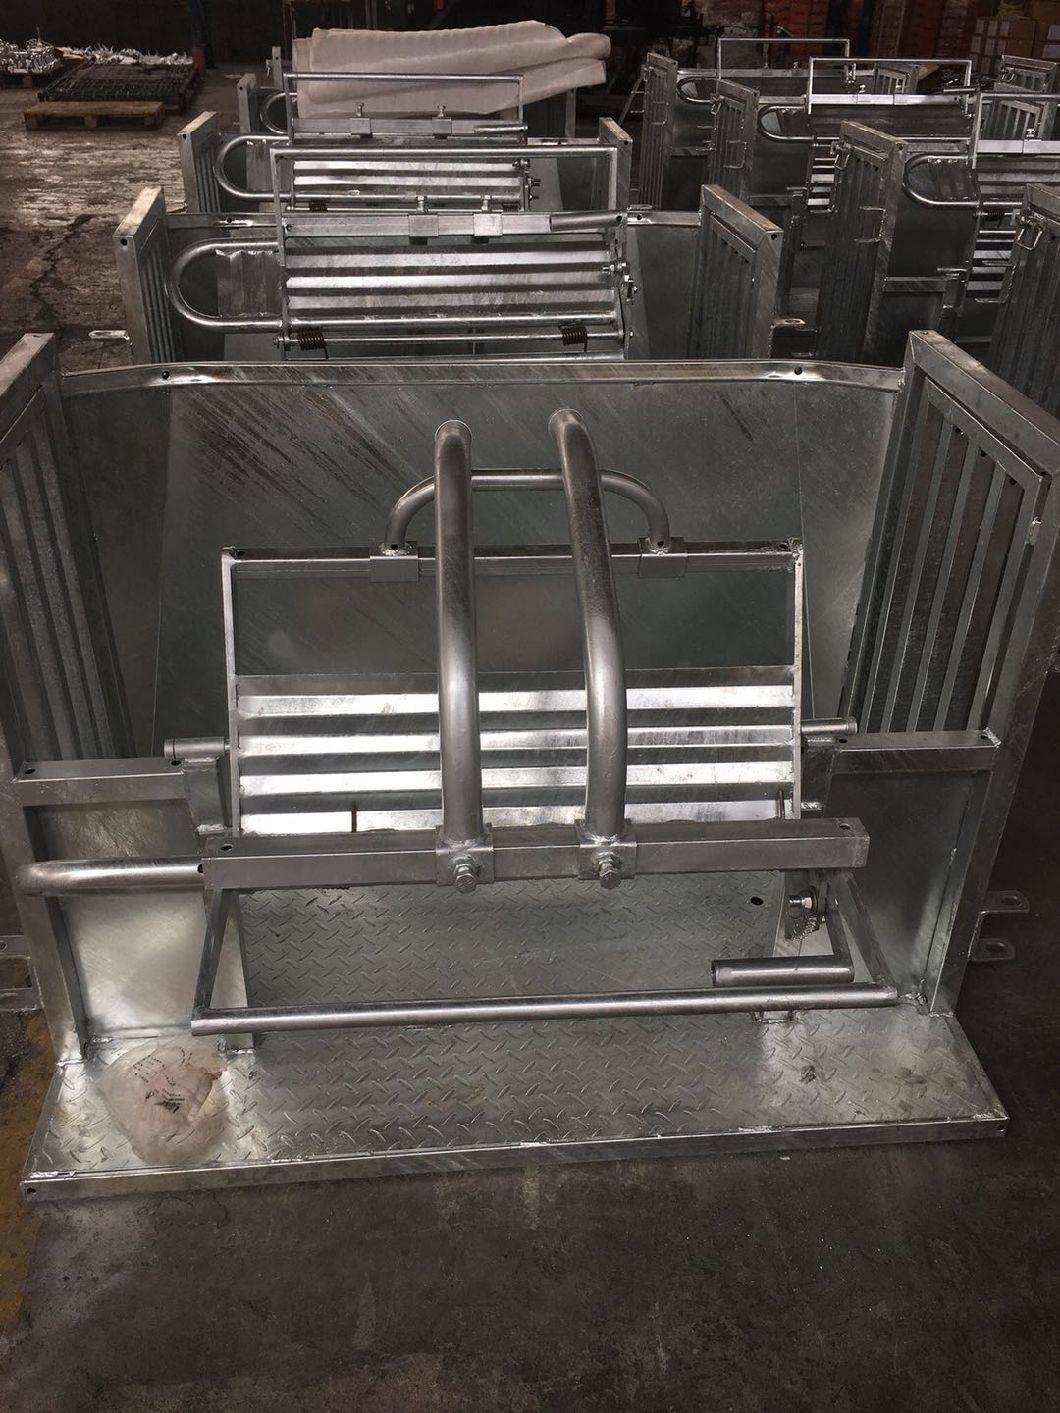 Galvanized Sheep Turnover Crate Used for Handling Equipment